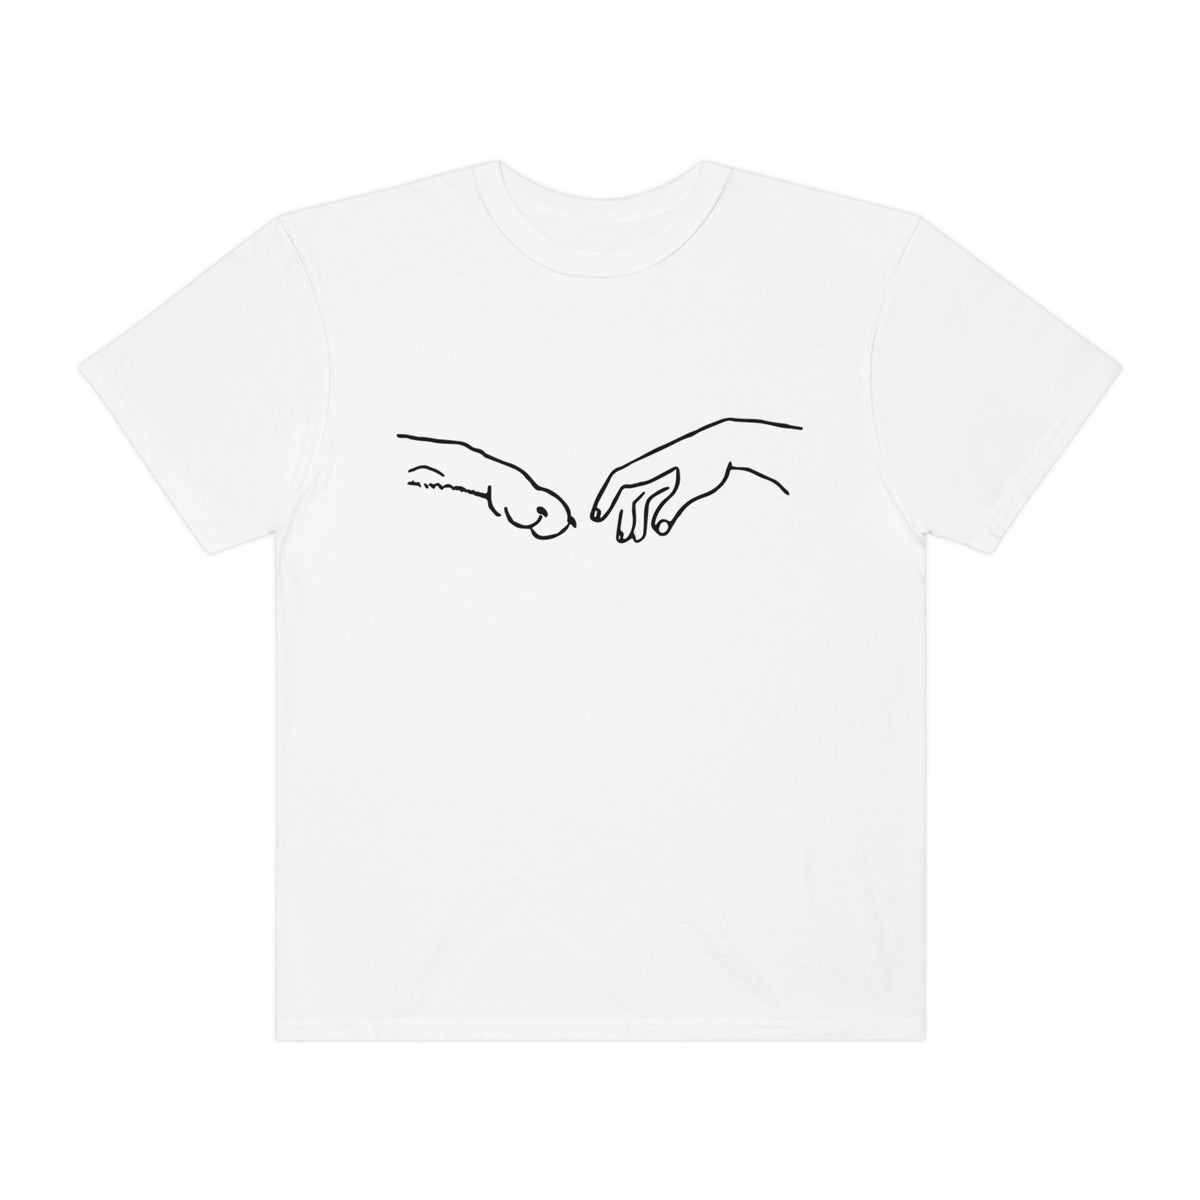 Hands of Dogs Garment-Dyed T-shirt